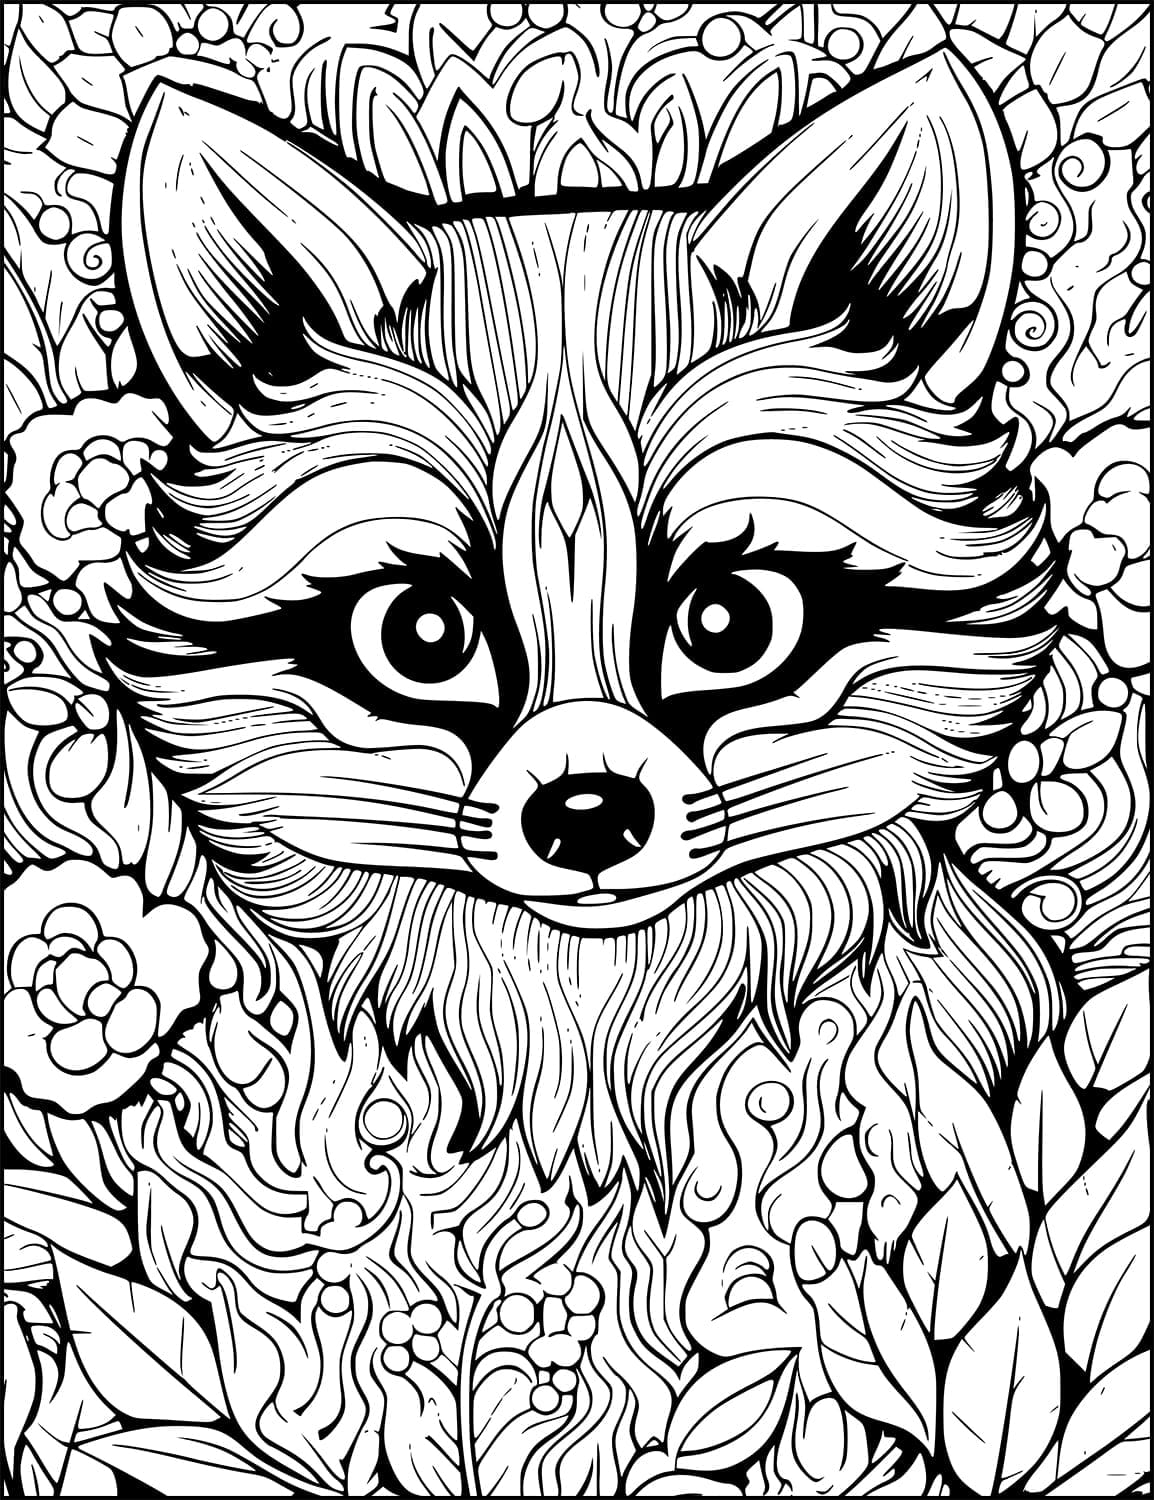 racoon mandala zentangle and zen doodle style from animals and flowers adult coloring book